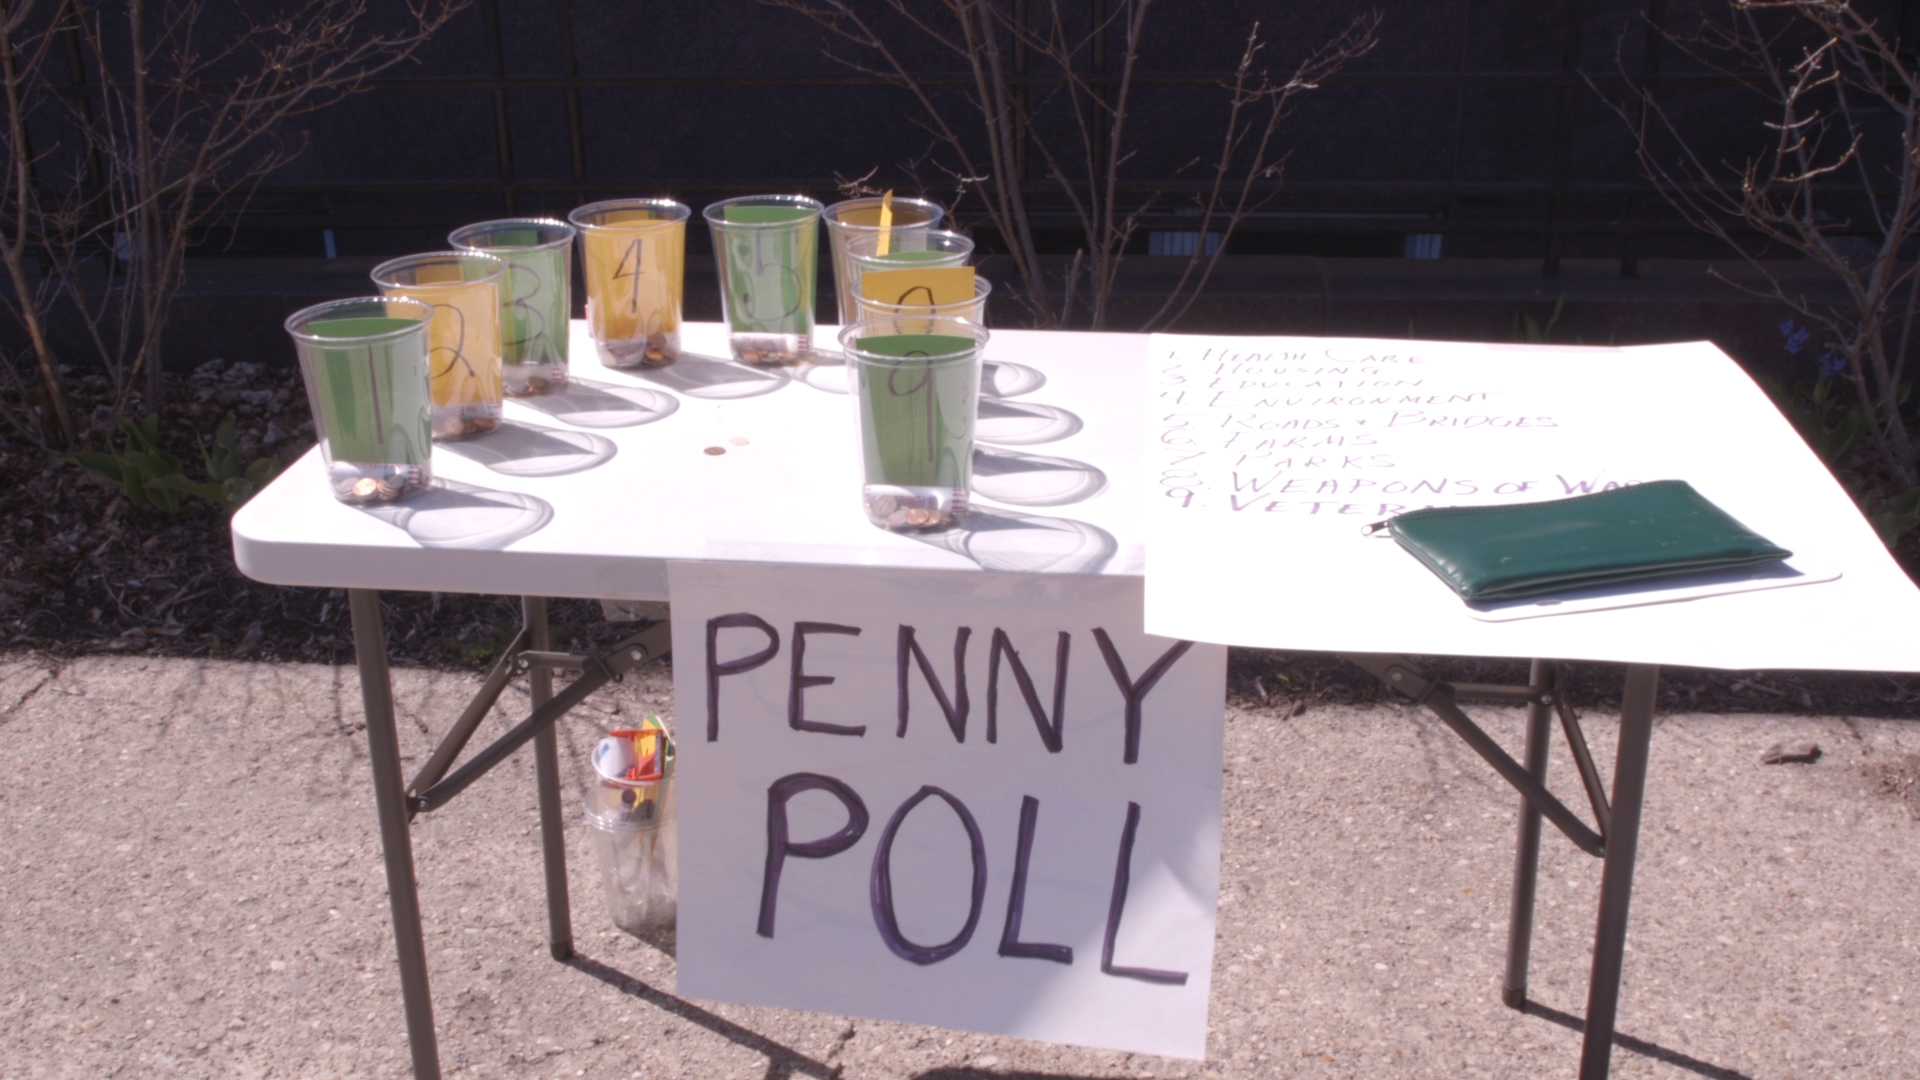 Penny poll in Traverse City asks the average person where they’d put their tax dollars